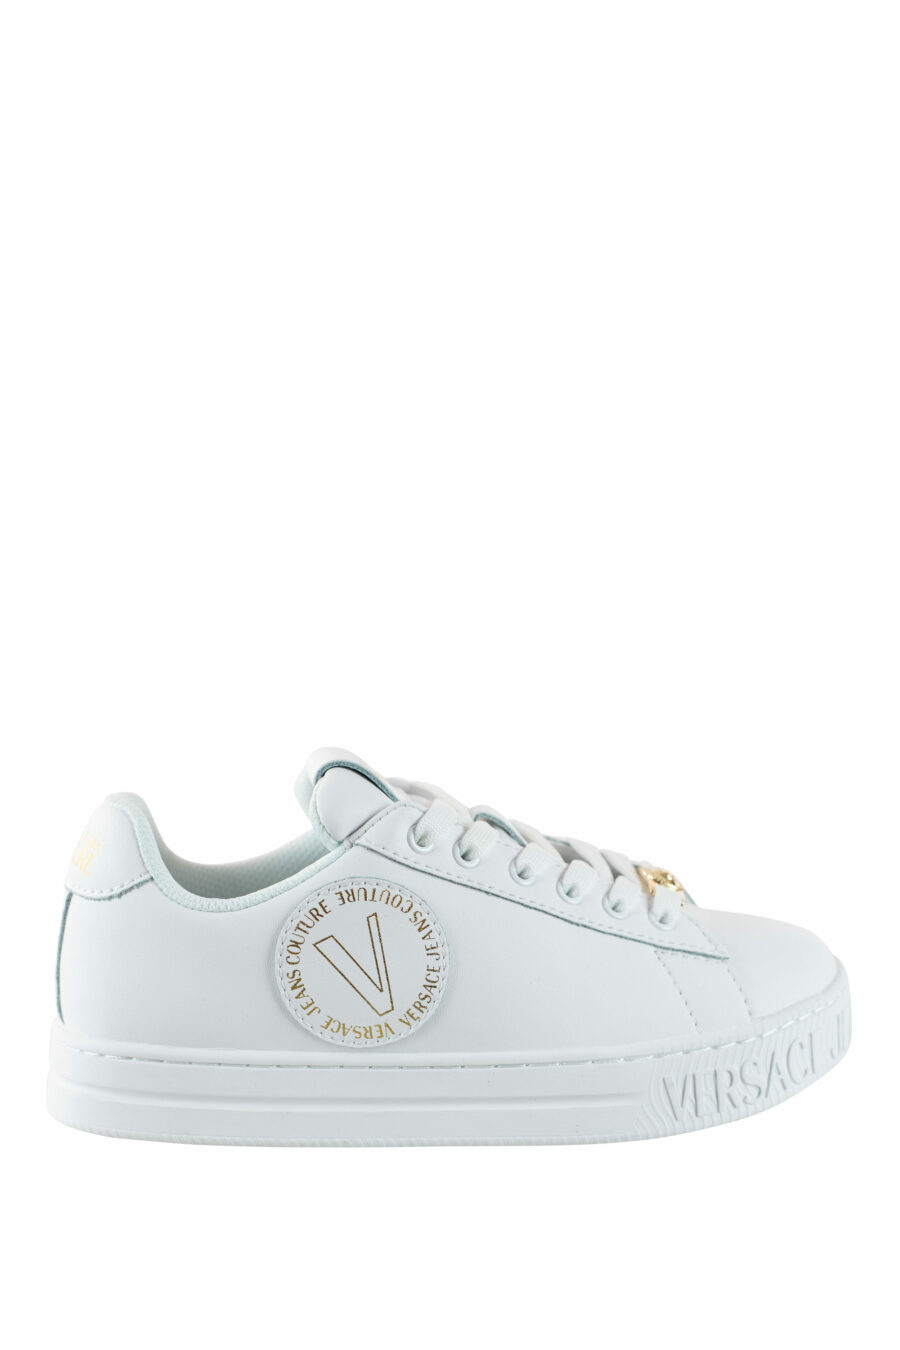 White and gold trainers with circular logo - IMG 4549